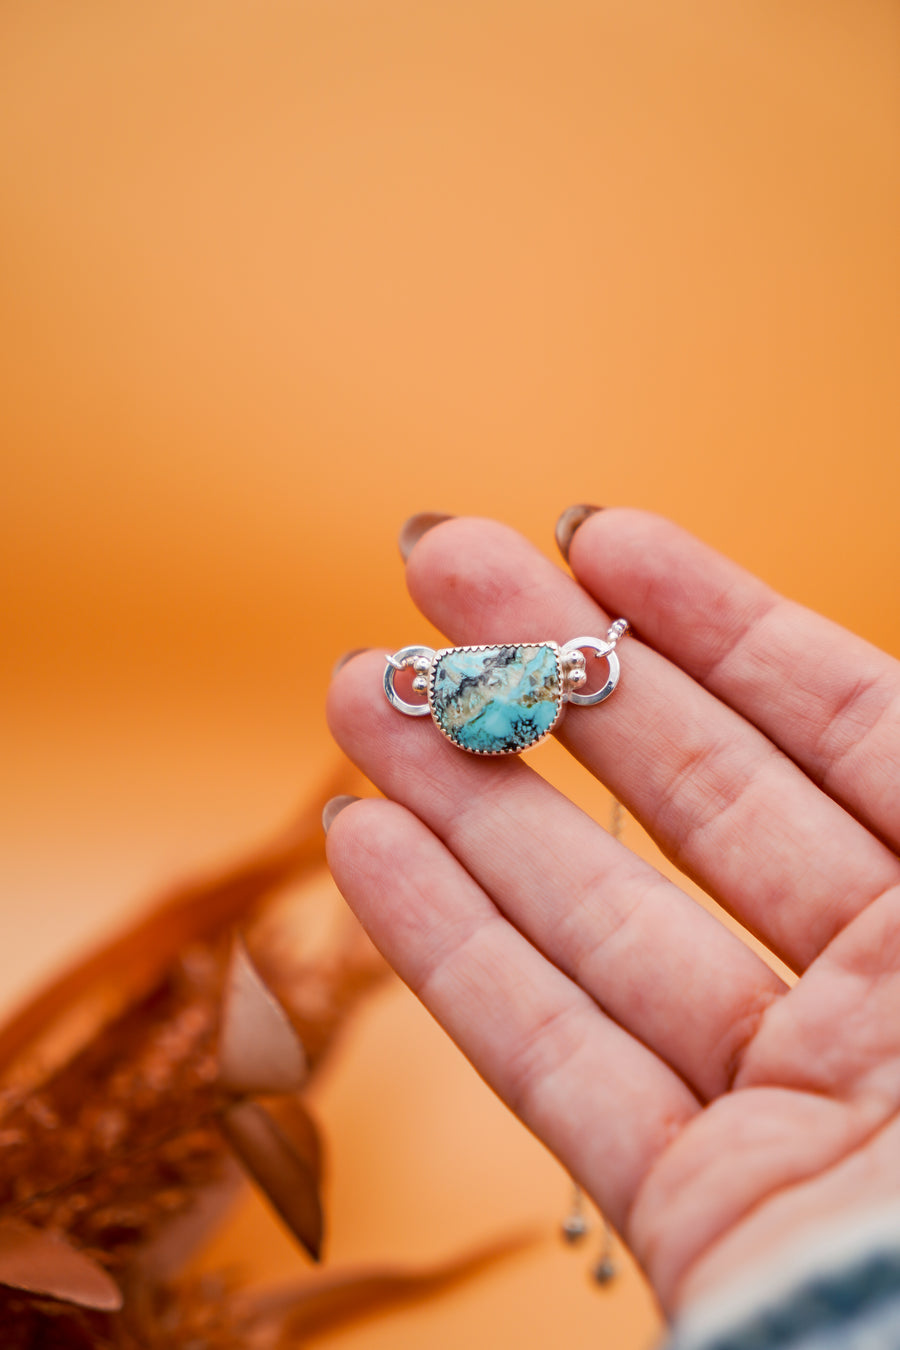 The Out West Adjustable Bracelet in Sandhill Turquoise